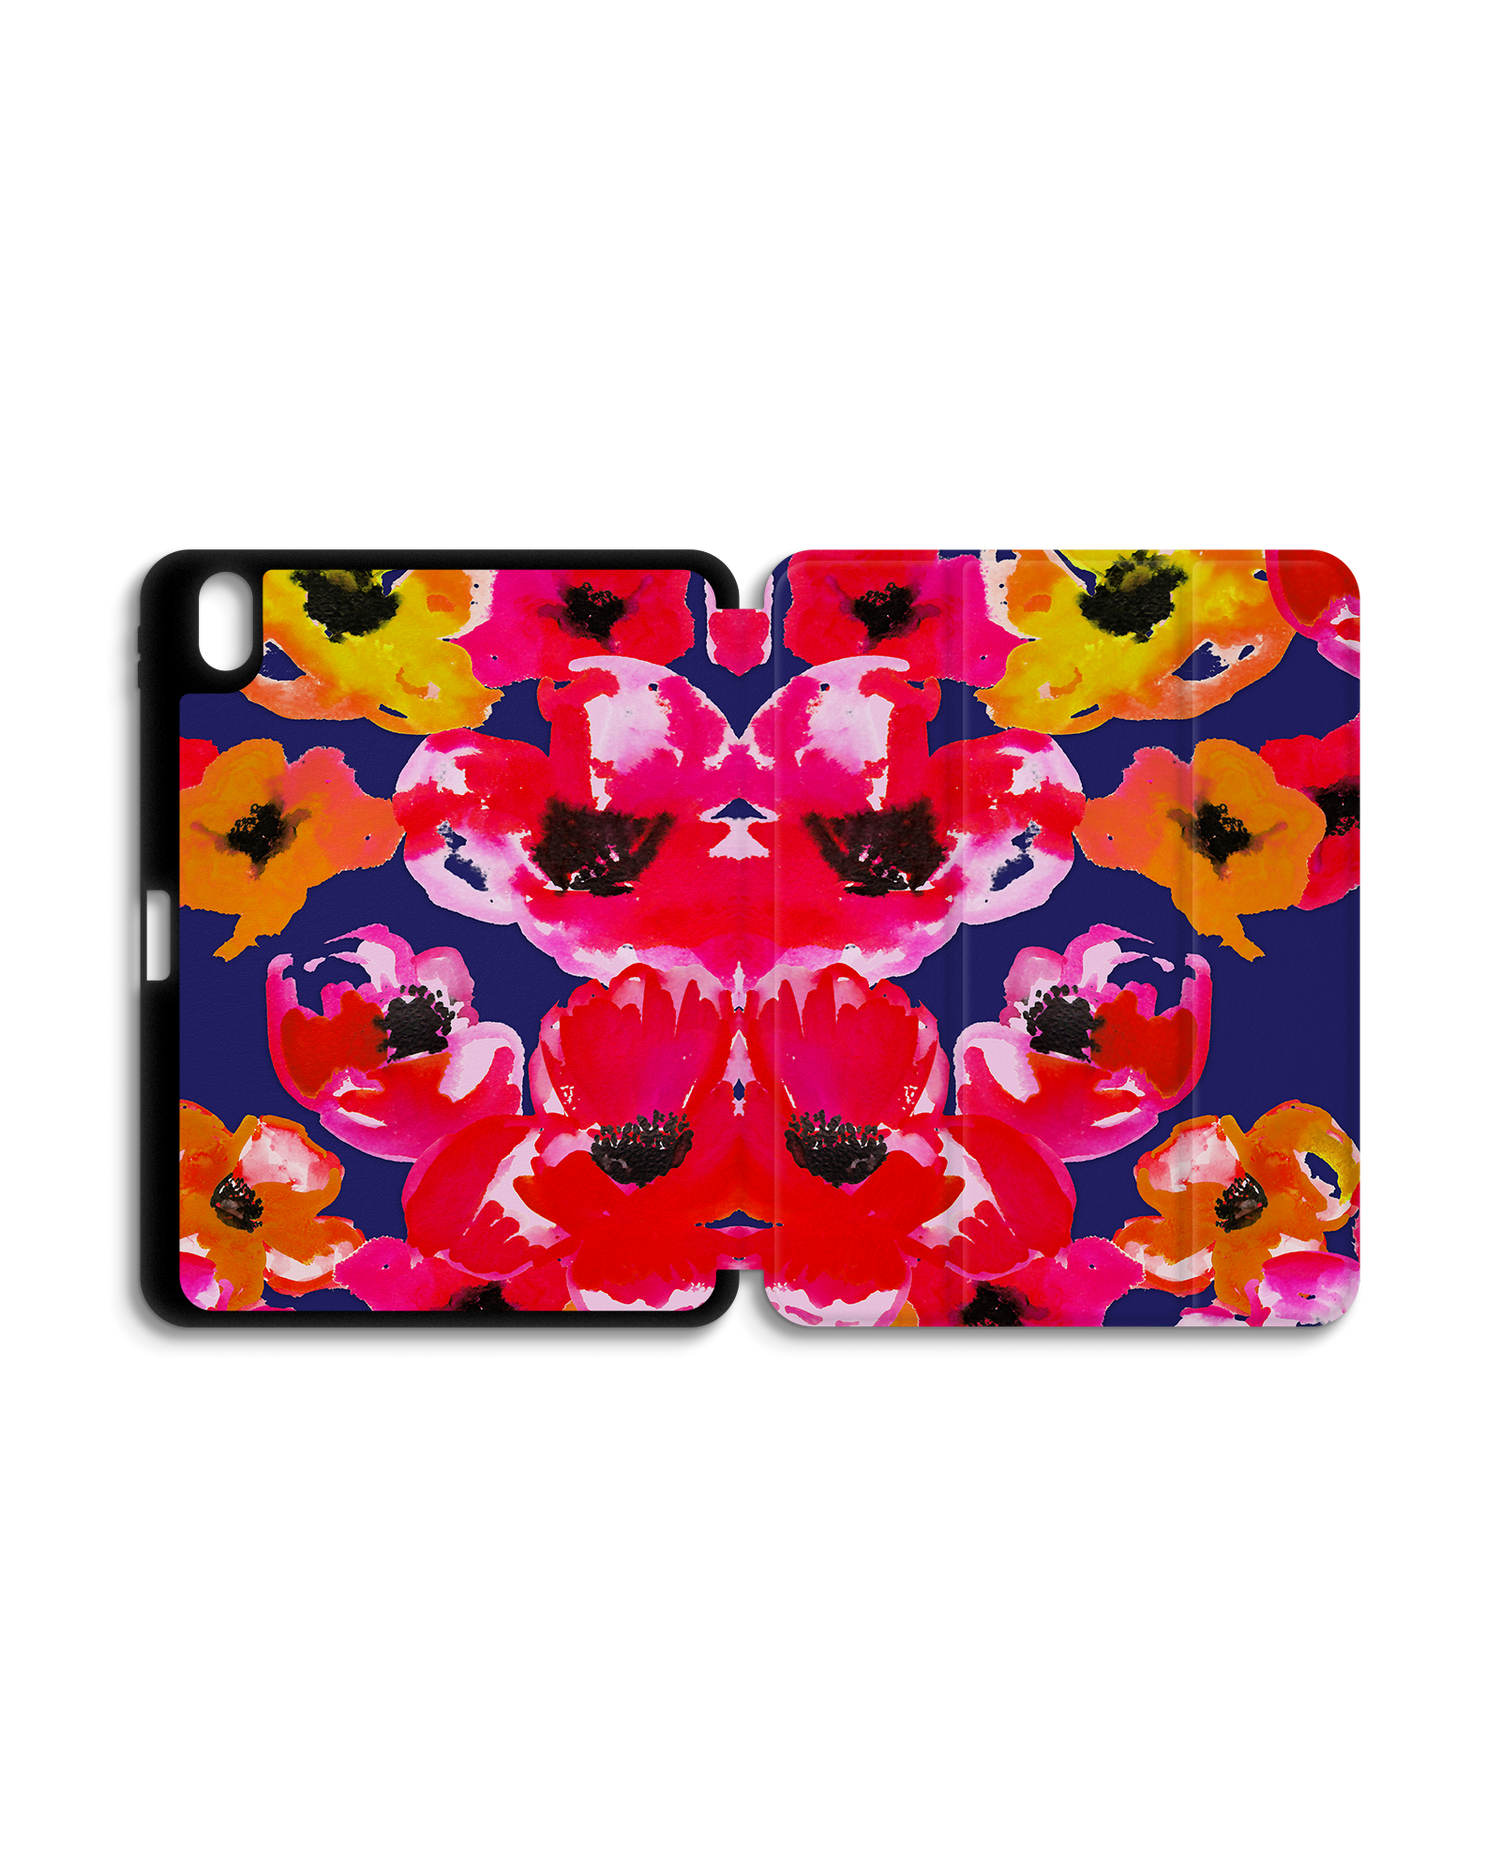 Painted Poppies iPad Case with Pencil Holder for Apple iPad (10th Generation): Opened exterior view